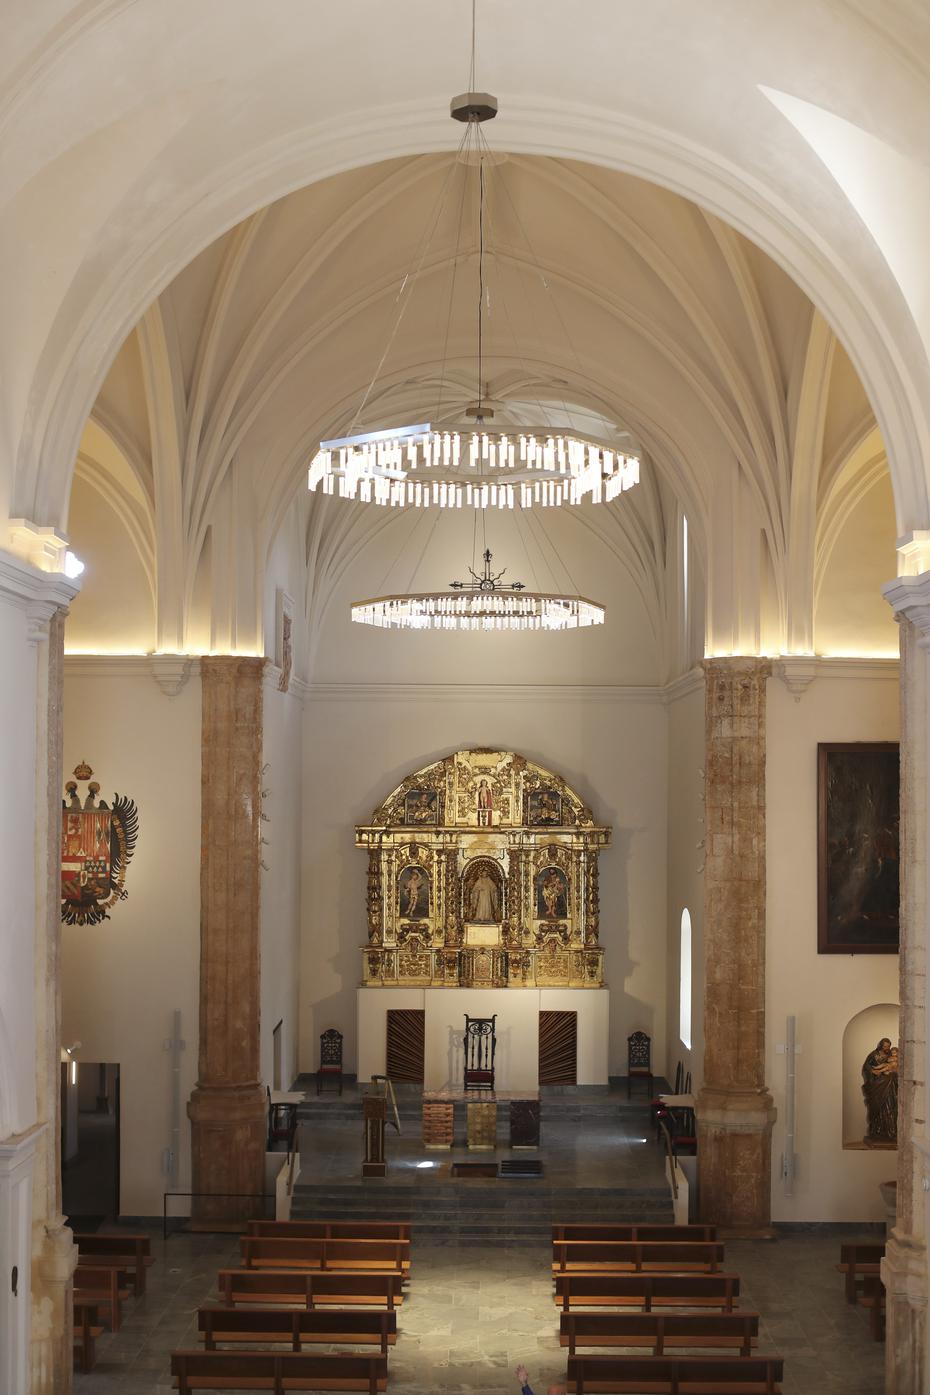 In the background, the gold decoration of the altar of the Church of San Jose.